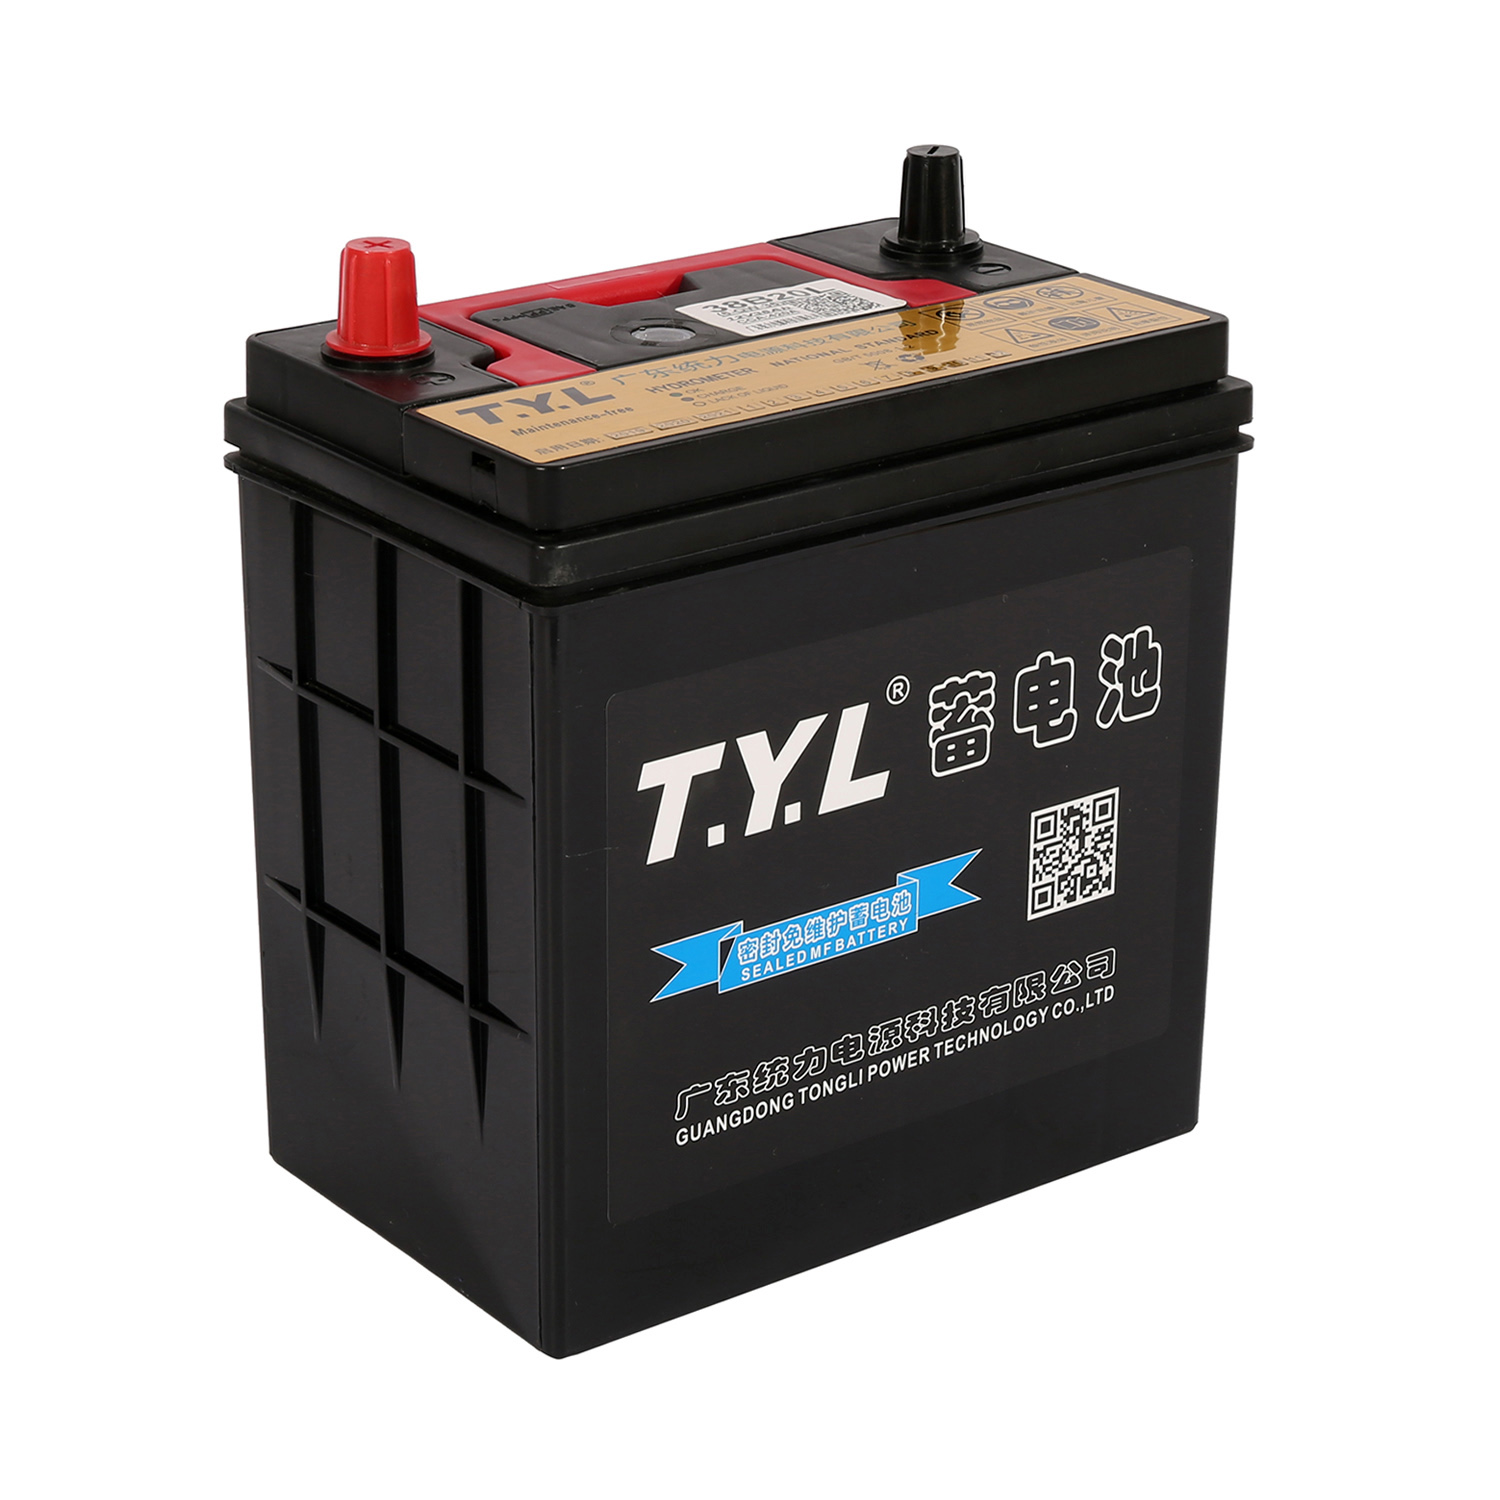 12V36AH High Performance Car Battery With Negative Terminal For Hybrid Vehicles